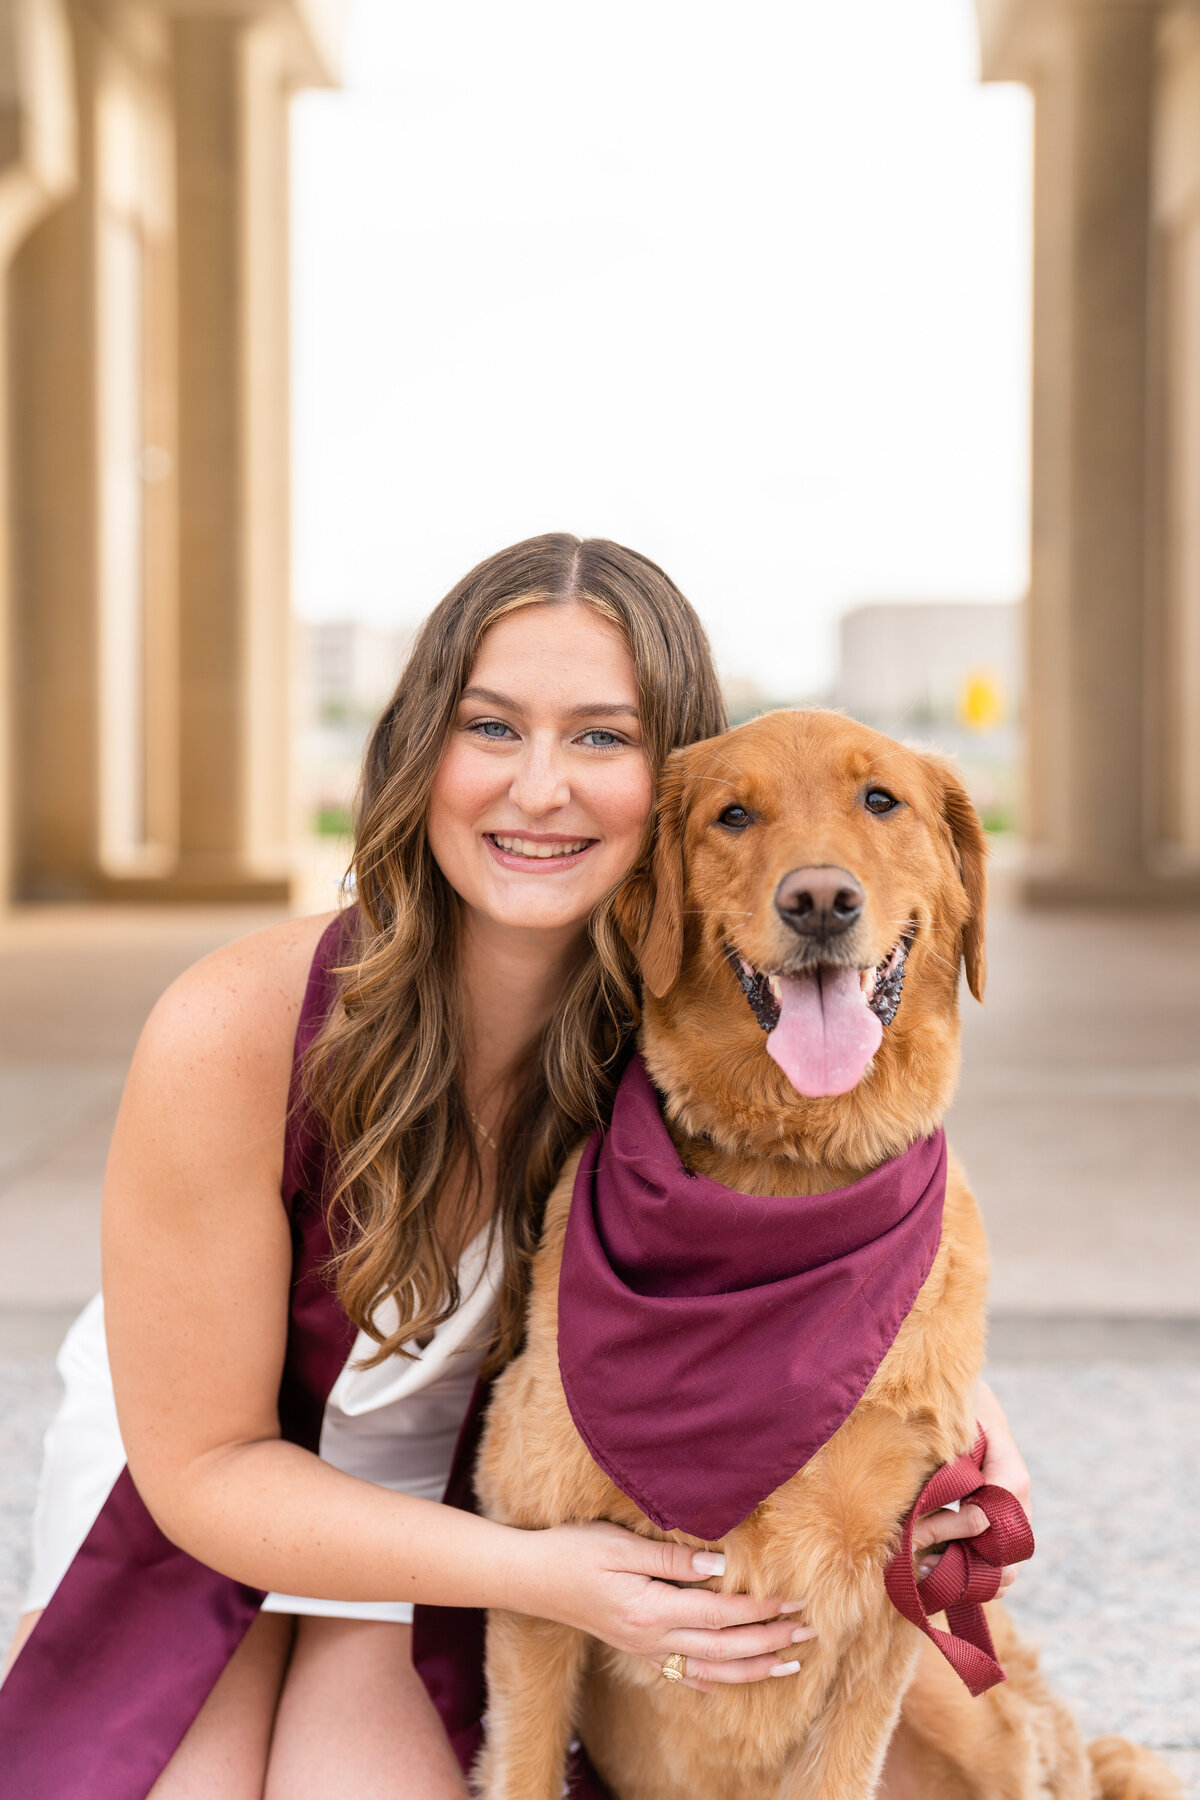 Texas A&M senior girl hugging dog while wearing white dress and Aggie stole in the archways of the Bell Tower